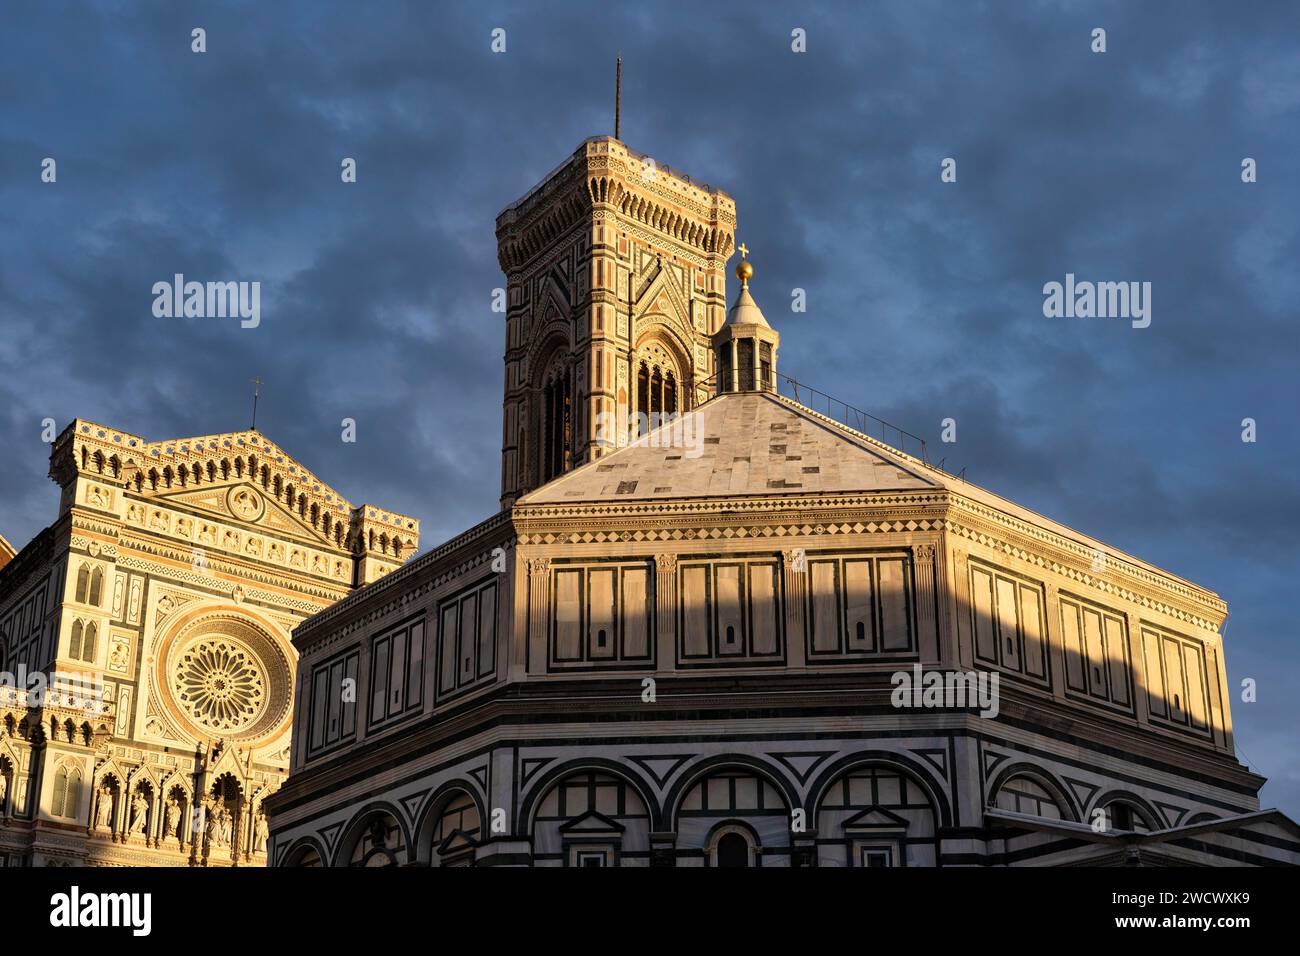 Italy, Toscane, Florence, Saint-Jean Baptistery, Duomo di Firenze and its bell tower Stock Photo